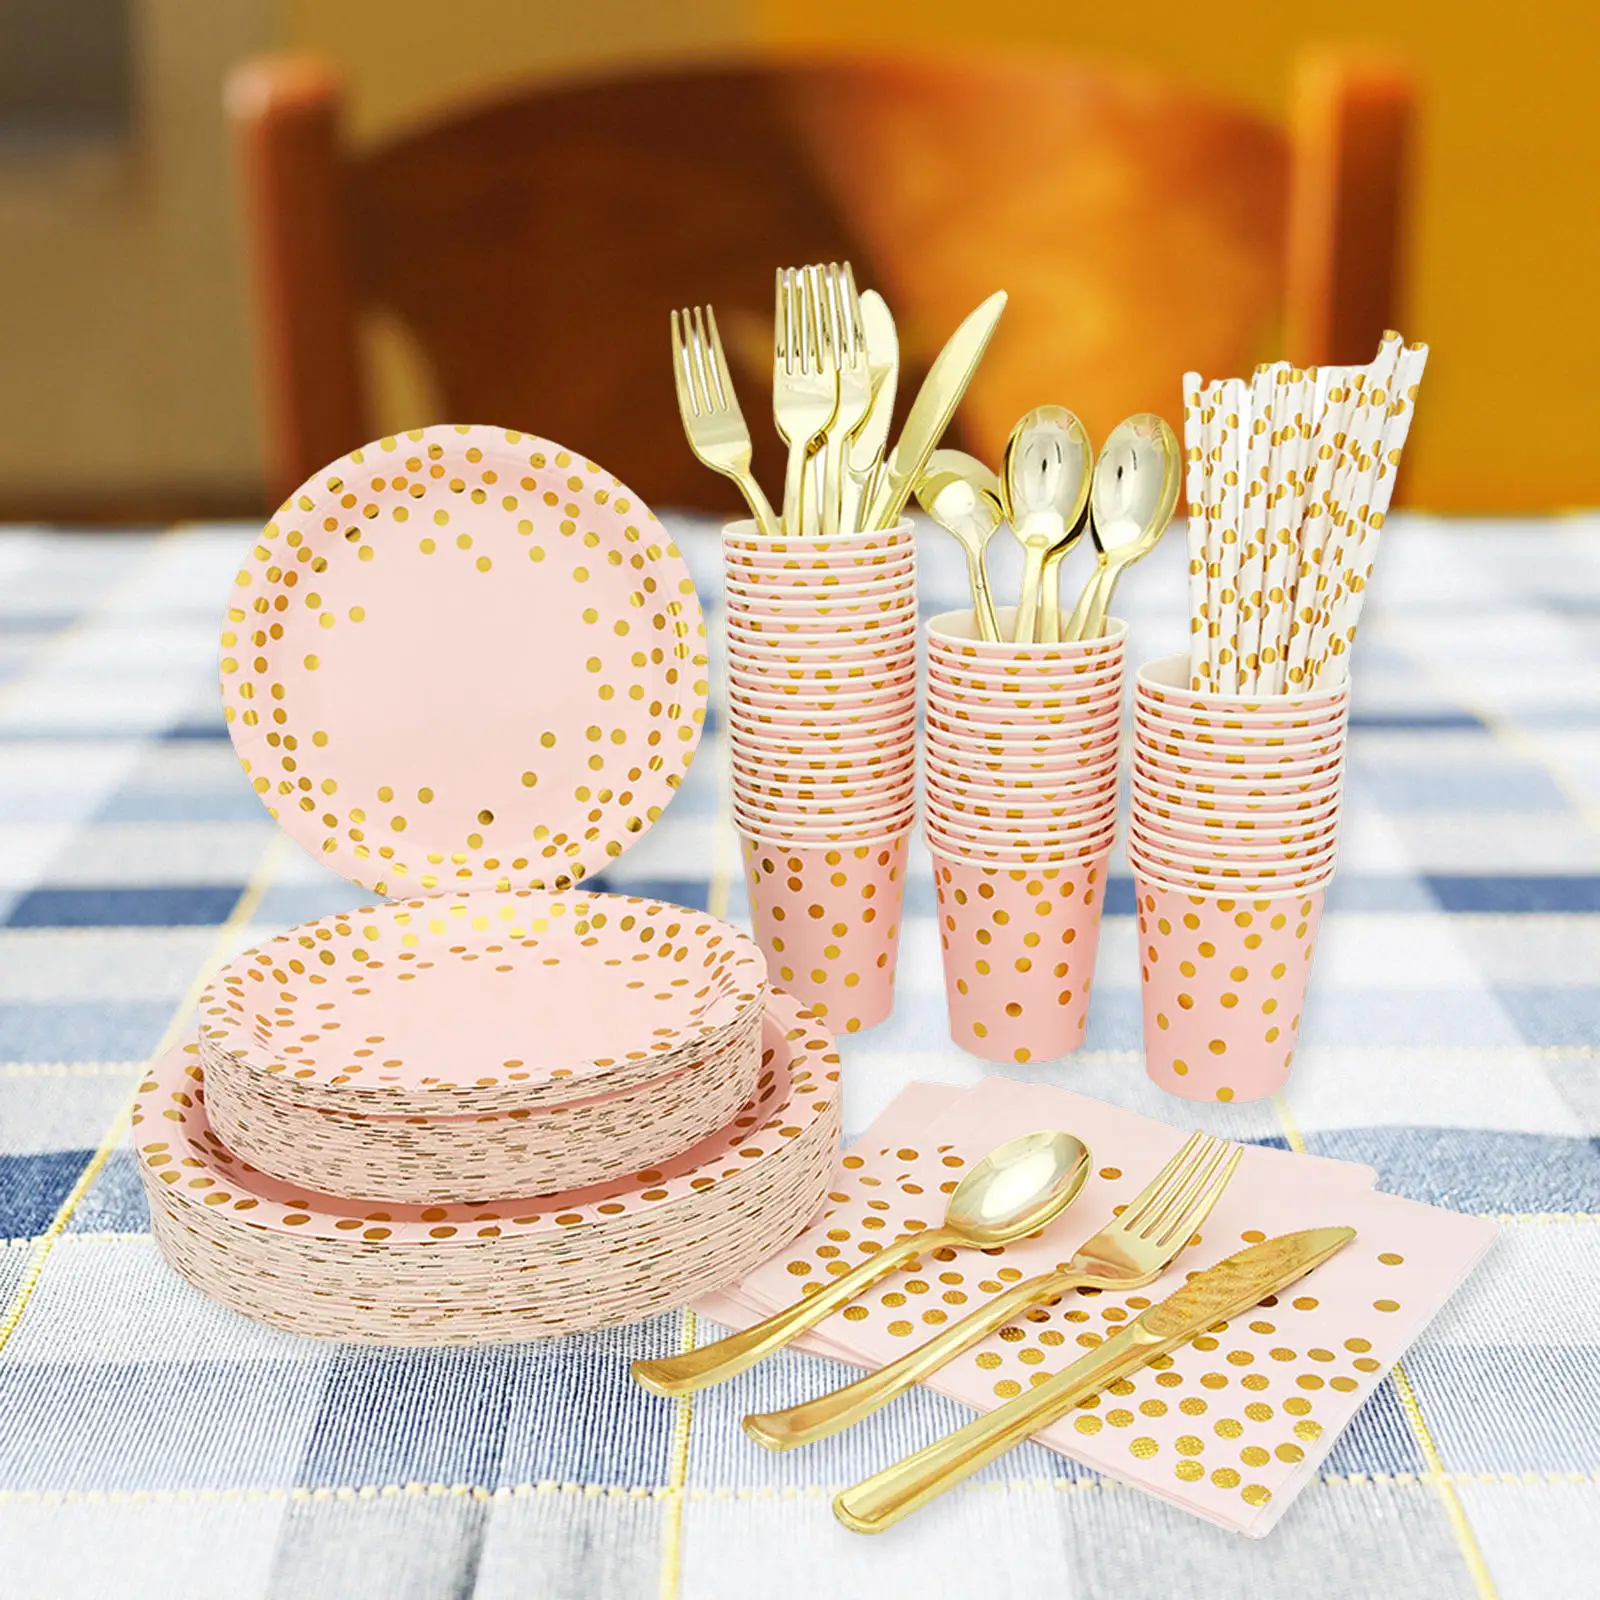 200 Pcs Disposable Dinnerware Sets, Paper Plates Cups, Gold Forks  Spoons for Graduation Birthday Party Supplies